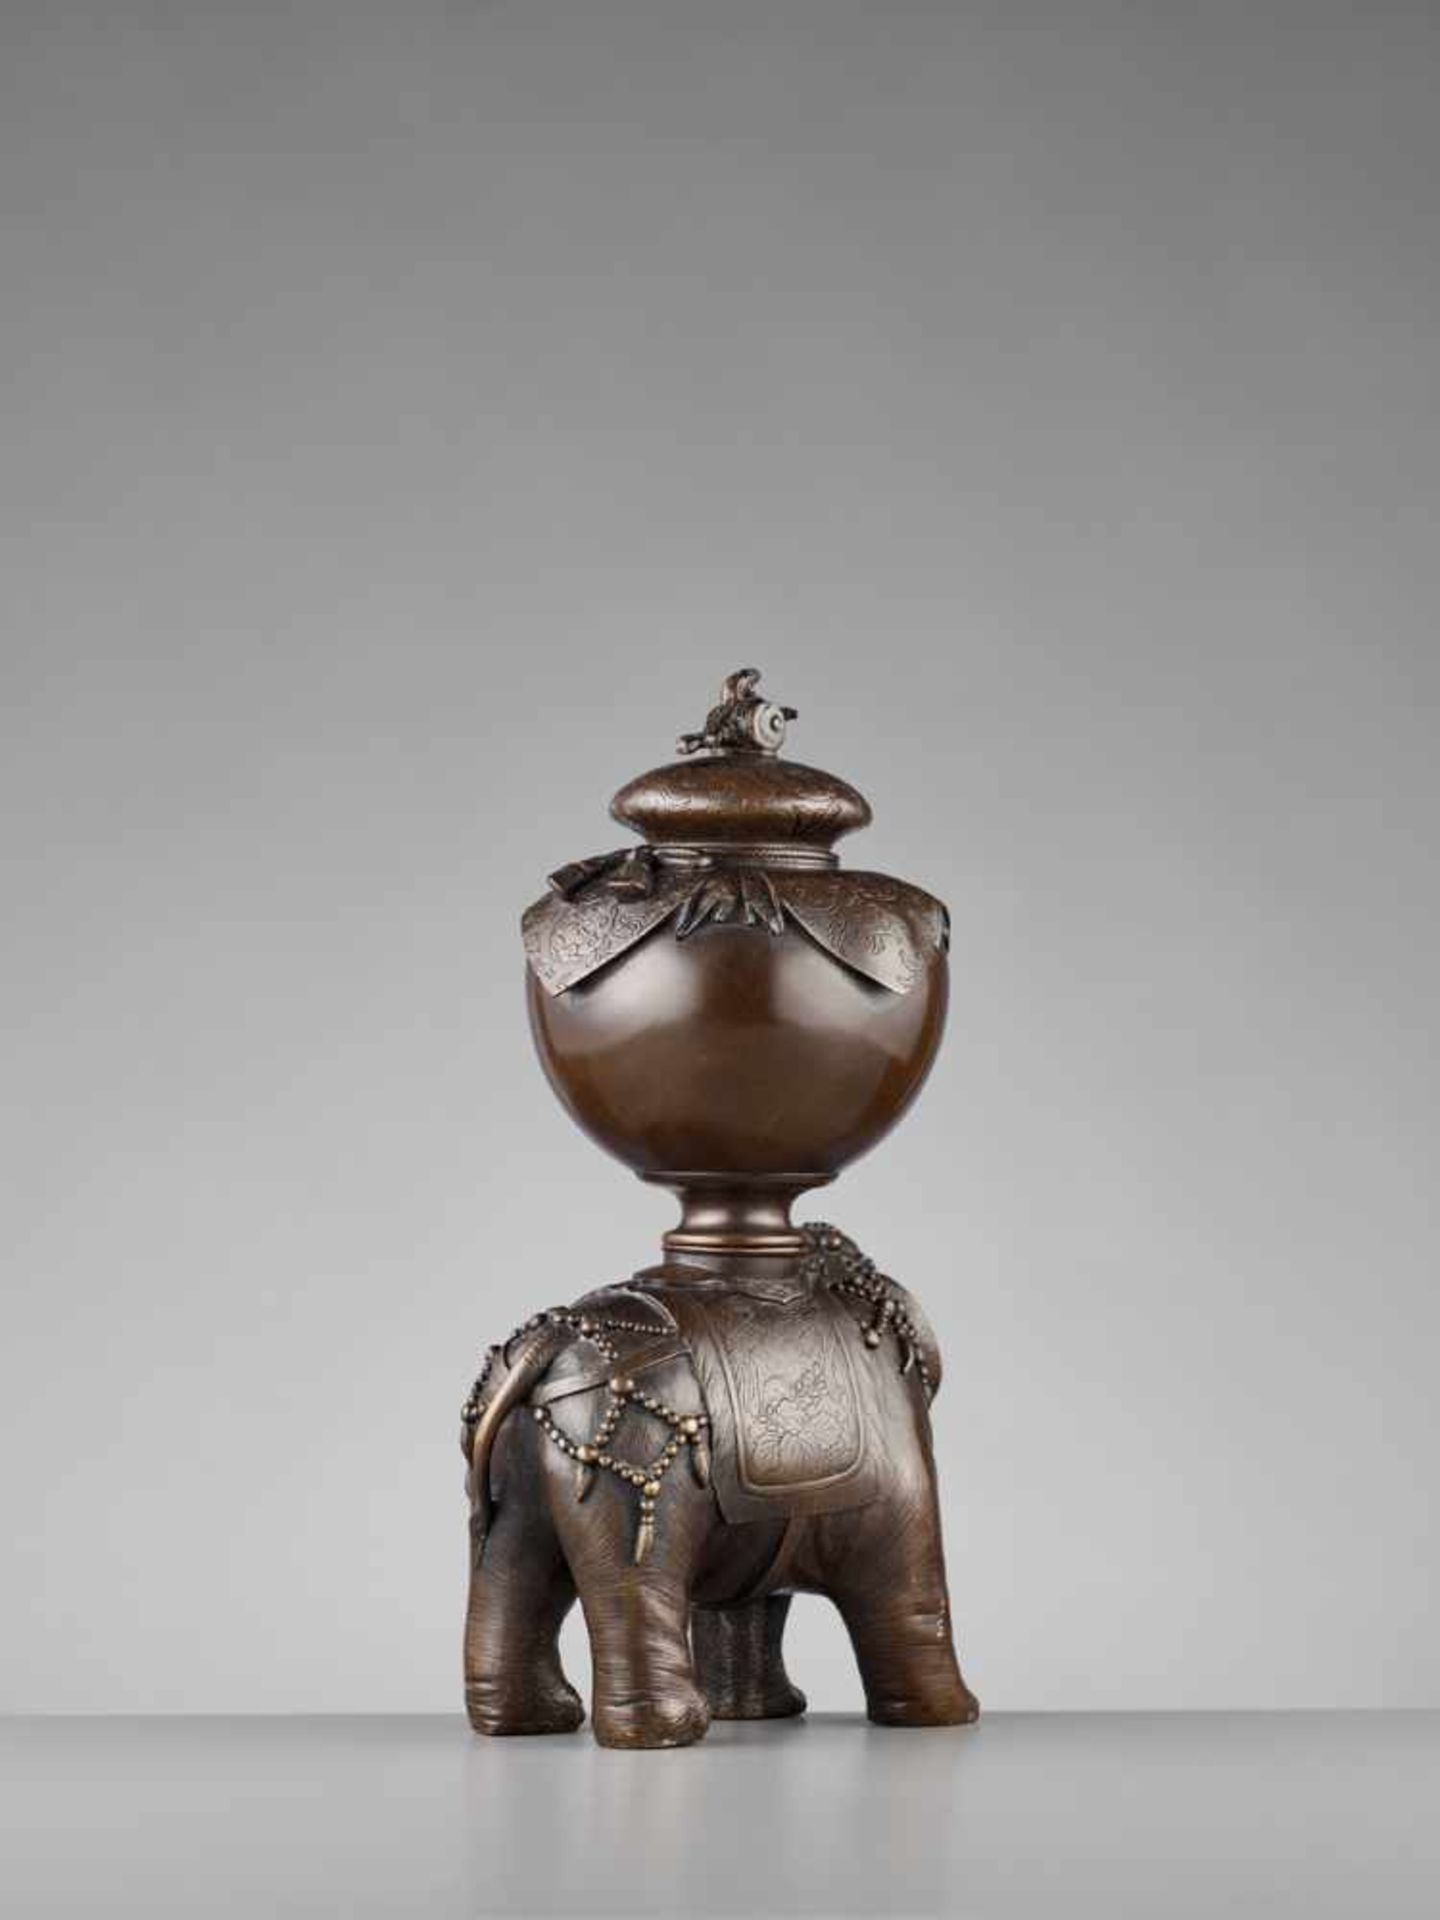 A FINE LARGE CAPARISONED ELEPHANT BRONZE KORO Japan, Meiji period (1868-1912)The pachyderm stands on - Image 4 of 10